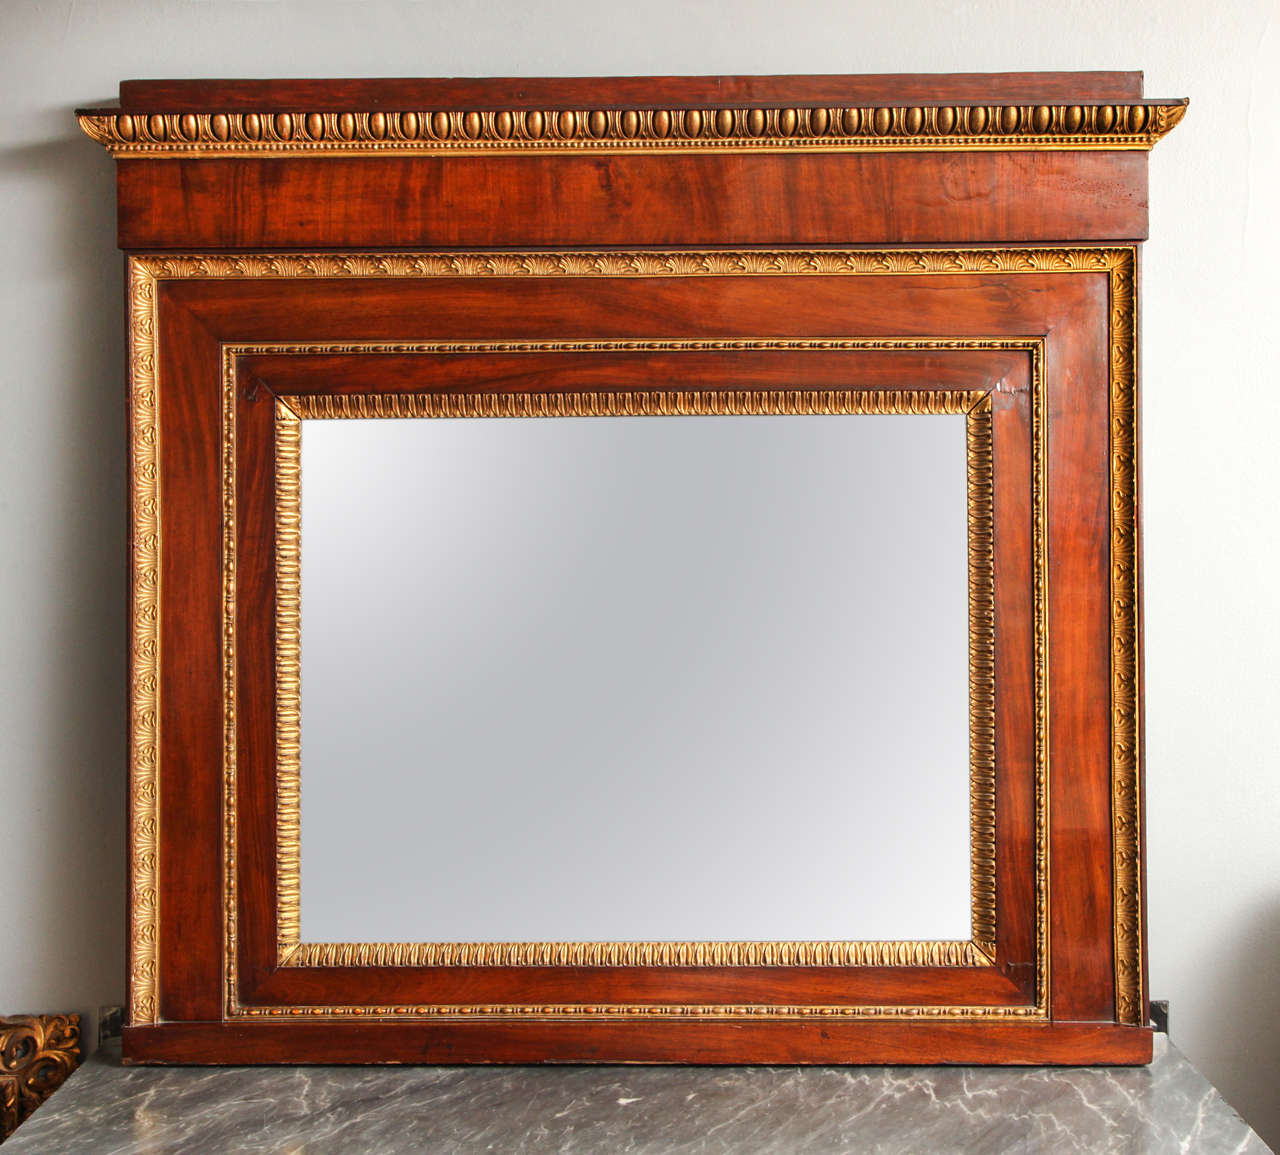 Large northern Italian mahogany and gilt-wood mirror with original glass. Handsome egg and dart, bead and reed, and acanthus details. Overall dimension: 58